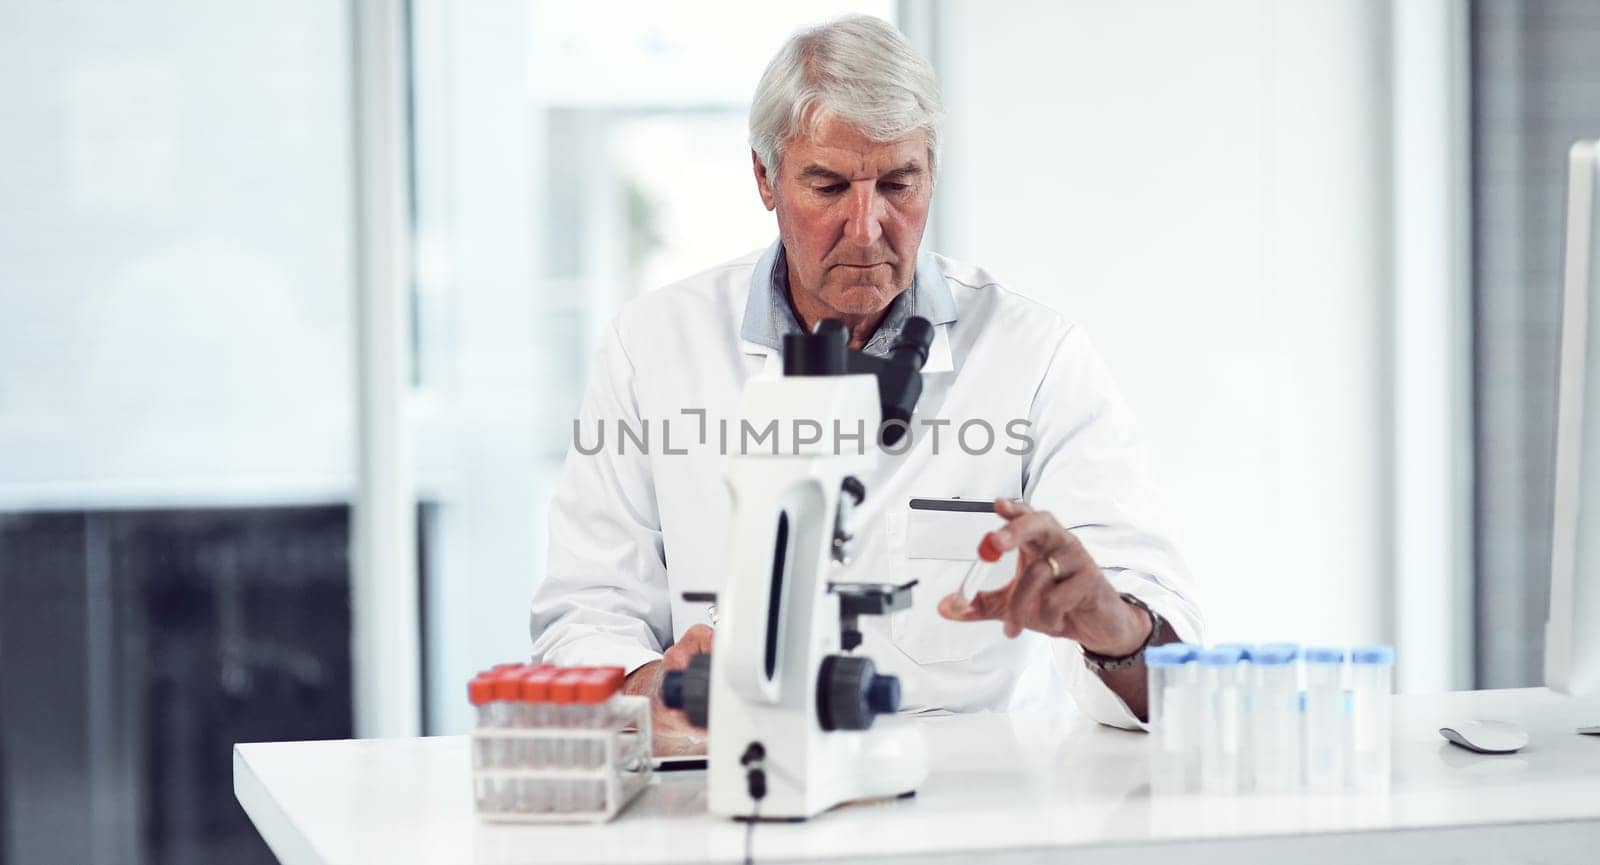 This is how the formula should look. a focused elderly male scientist holding up a test tube and making notes while being seated inside of a laboratory